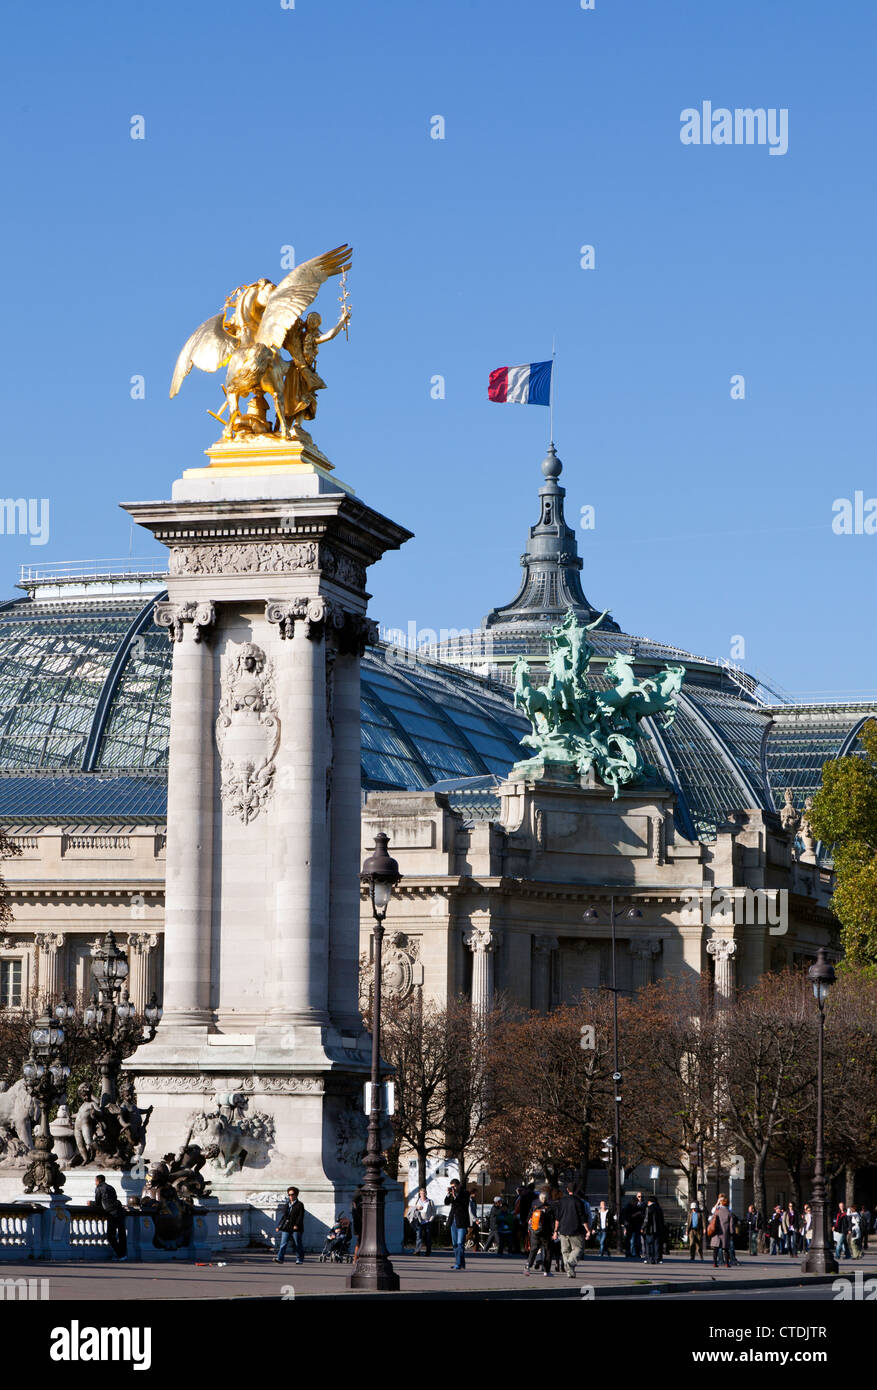 One of the golden statues that line Pont Alexandre II sets the scene for the Grand Palais des Champs-Elysee in background. Stock Photo